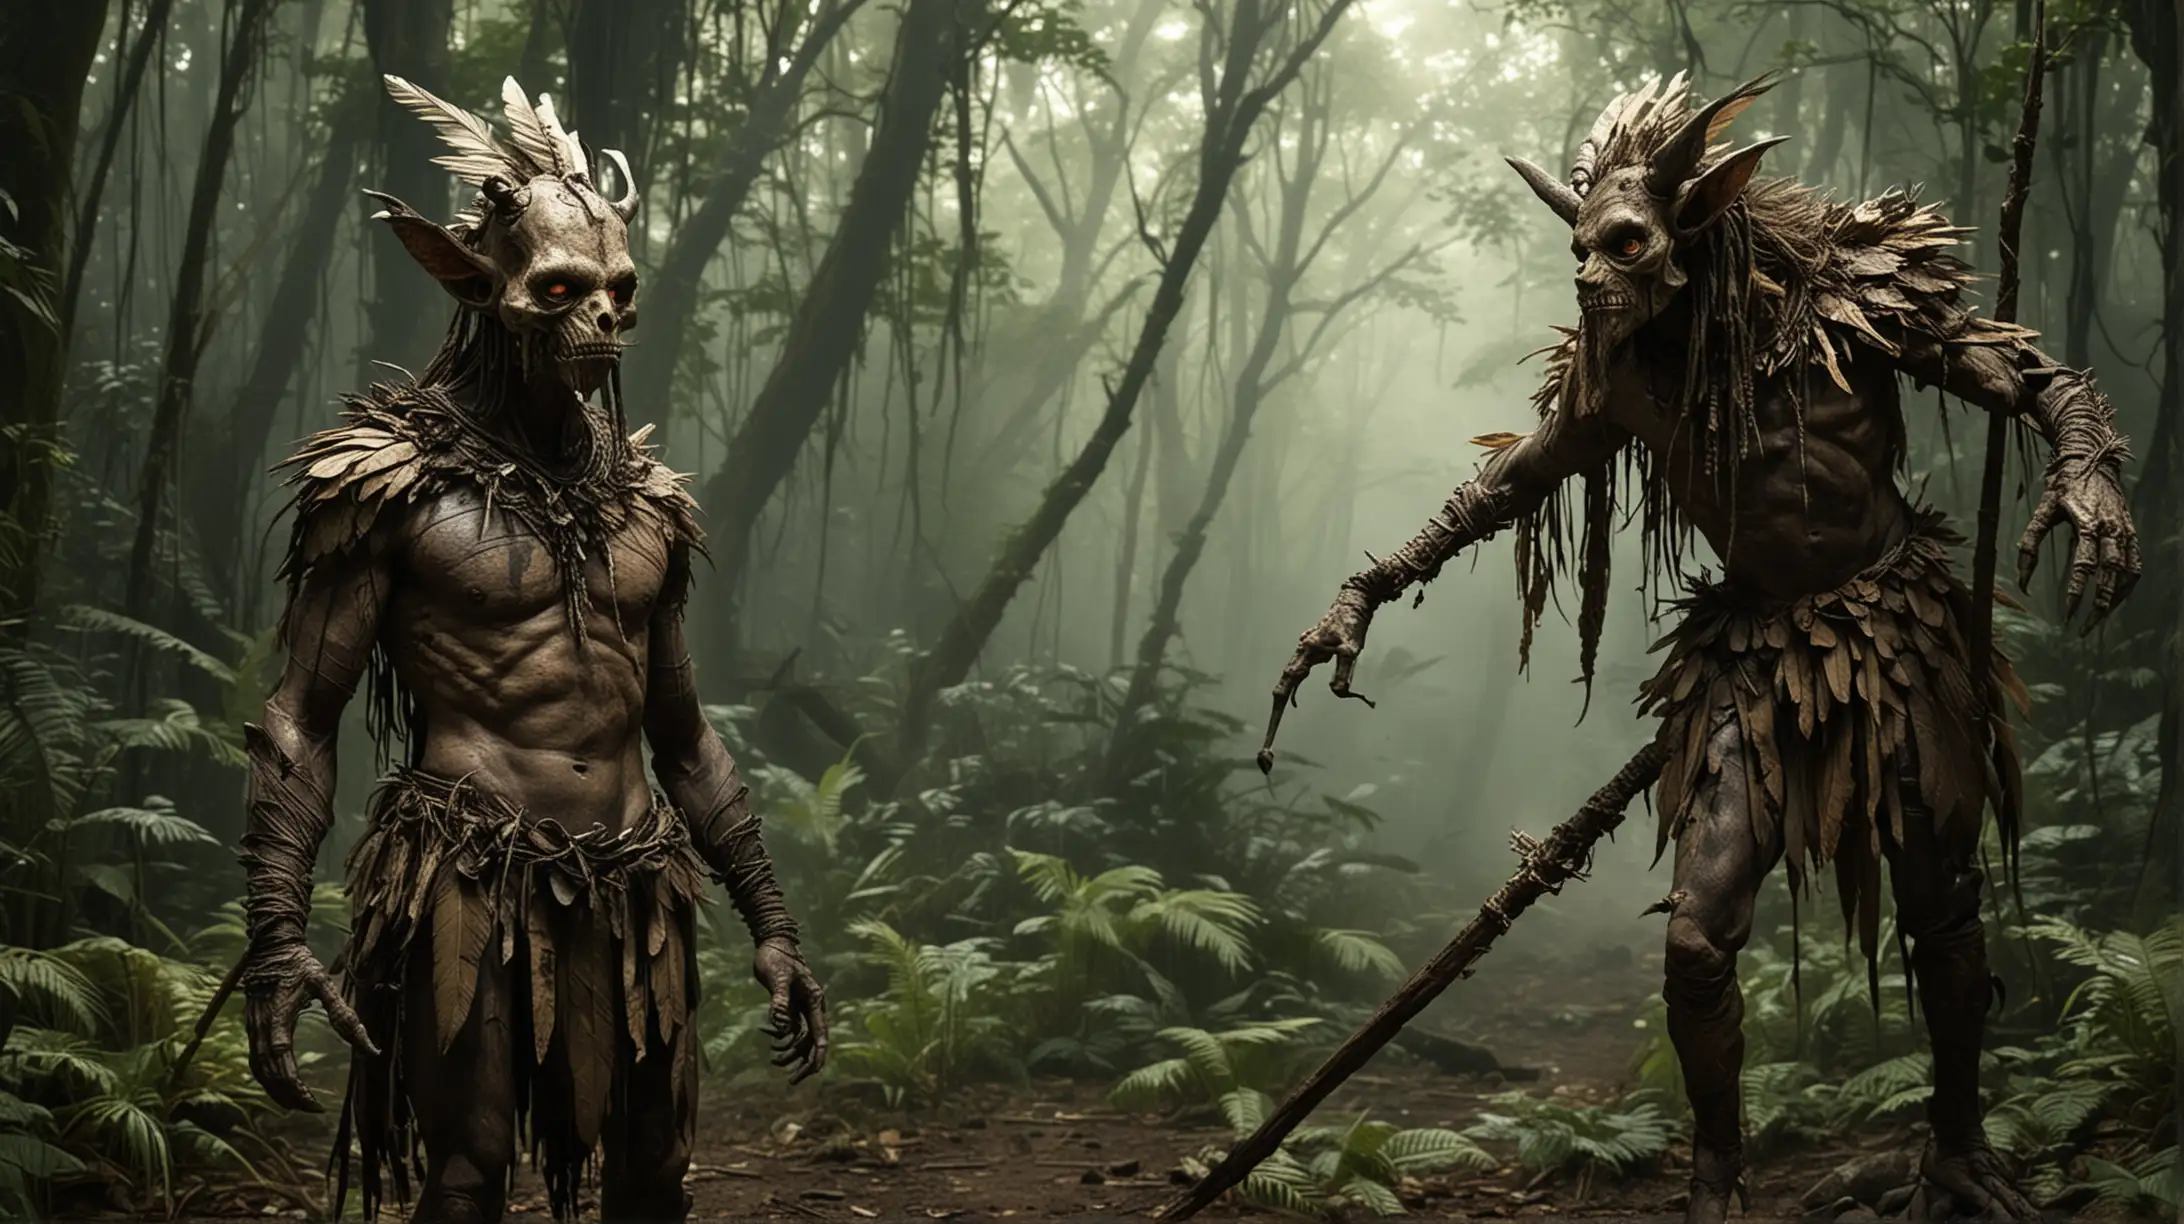 It was vaguely humanoid, standing in a jungle. He's shorter than a human with a wiry build and skin the color of sunbaked earth. Its head, however, was a grotesque mask of bone and hide, adorned with feathers and sharpened boar tusks. The creature clutched a crude spear in one hand and a heavy club in the other, its dark eyes burning with suspicion.
